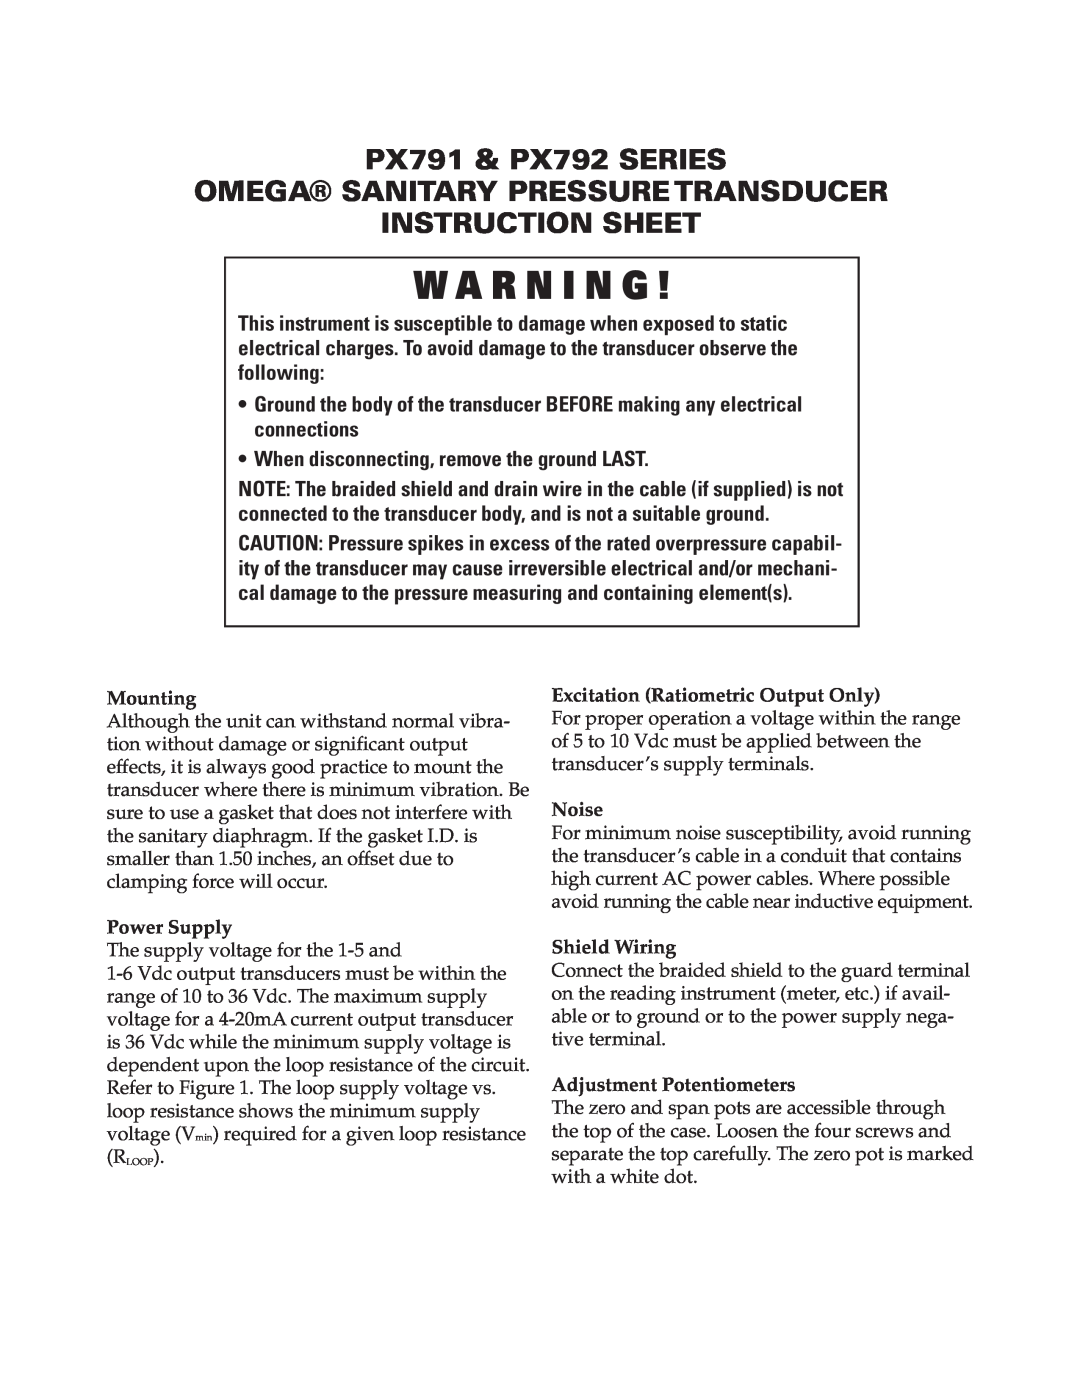 Omega Vehicle Security manual PX791 & PX792 SERIES, Omega Sanitary Pressure Transducer, Instruction Sheet, W A R N I N G 